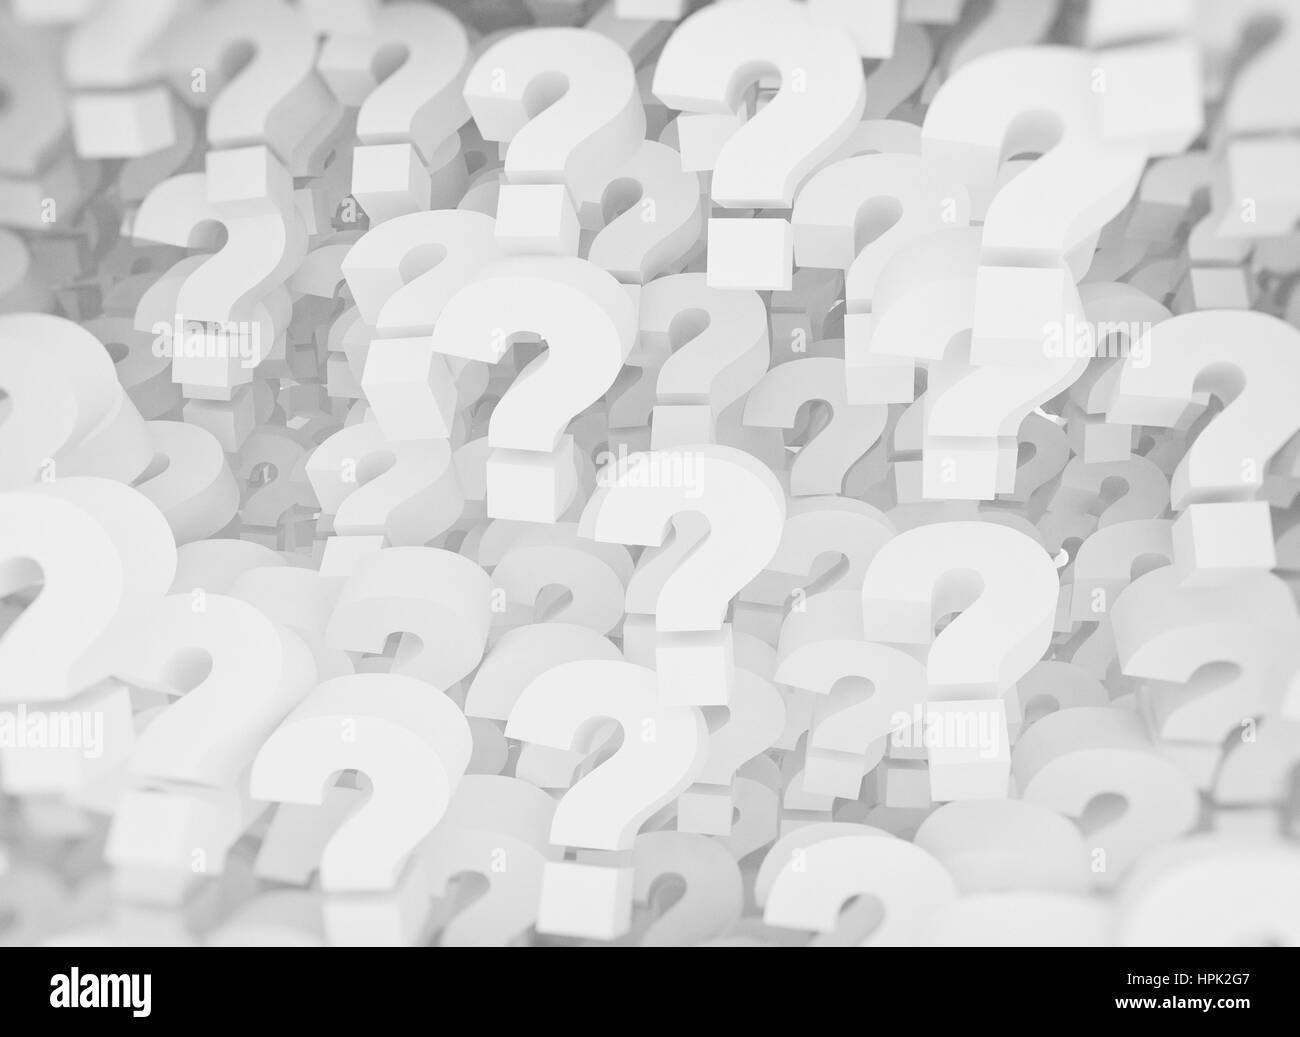 A background of question mark signs and symbols Stock Photo